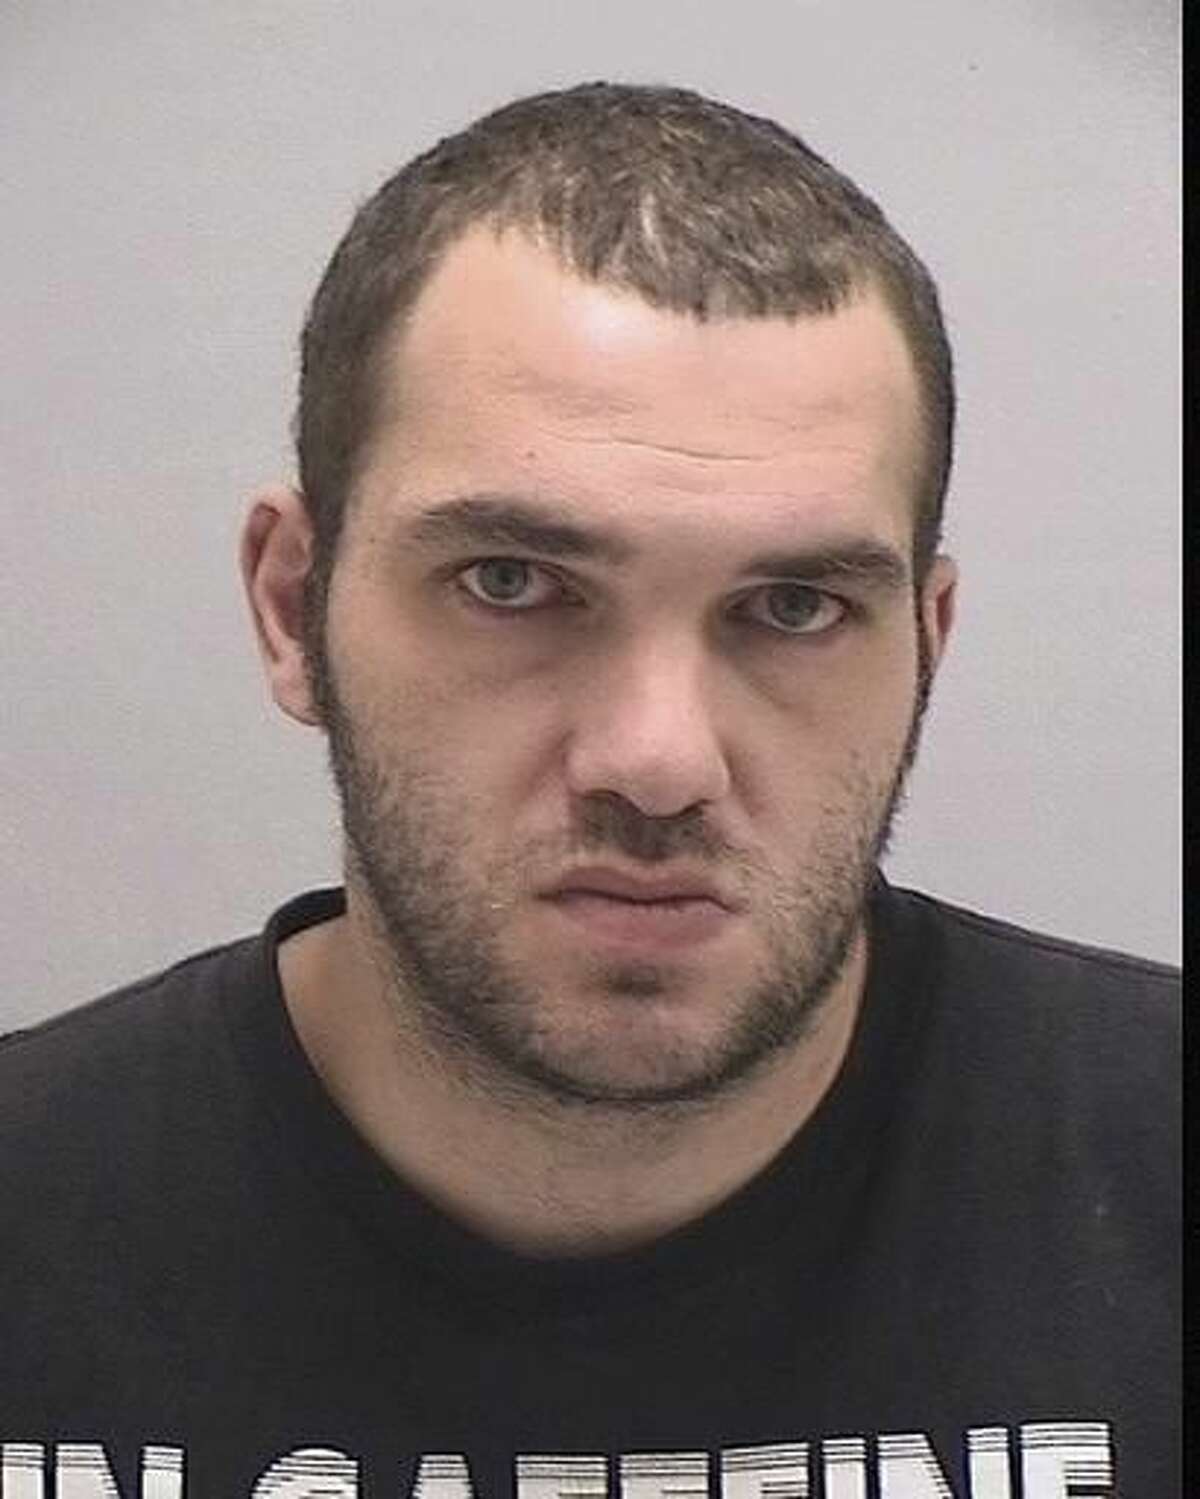 This undated handout photo provided by the Town of Orange Police Department in Connecticut shows Rory Clark. Clark was charged with a felony count of impairing morals of a minor and misdemeanor breach of peace after police say he engaged in sexual activity in a parked car in on Nov. 15, 2016, while a 6-year-old boy watched in the back seat. (Town of Orange Police Department via AP)